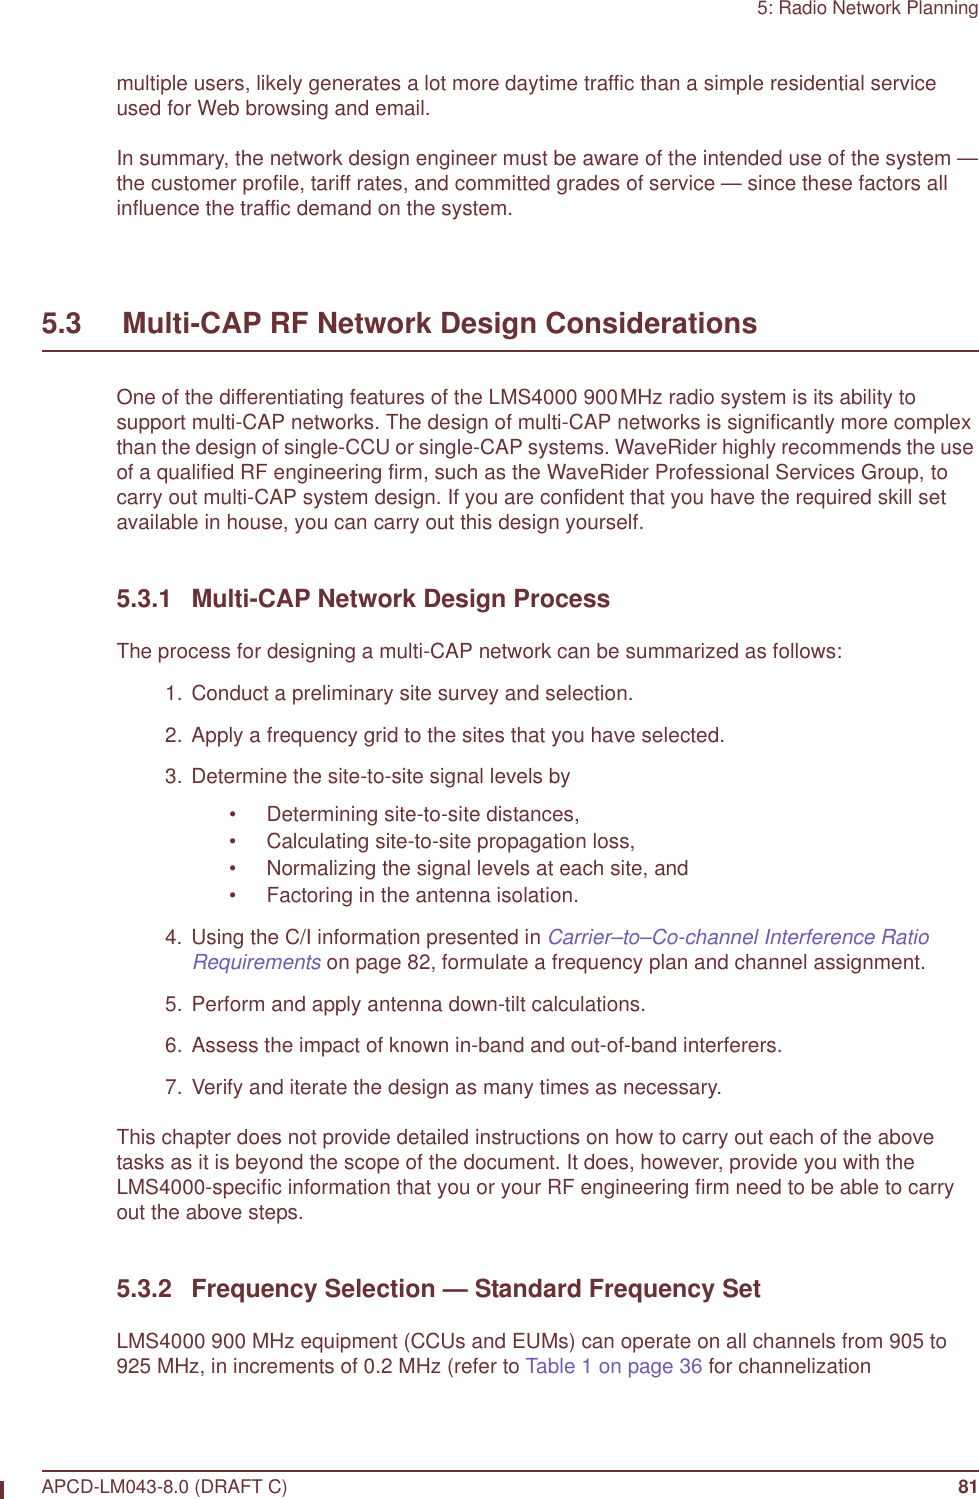 5: Radio Network PlanningAPCD-LM043-8.0 (DRAFT C) 81multiple users, likely generates a lot more daytime traffic than a simple residential service used for Web browsing and email. In summary, the network design engineer must be aware of the intended use of the system —the customer profile, tariff rates, and committed grades of service — since these factors all influence the traffic demand on the system.5.3     Multi-CAP RF Network Design ConsiderationsOne of the differentiating features of the LMS4000 900MHz radio system is its ability to support multi-CAP networks. The design of multi-CAP networks is significantly more complex than the design of single-CCU or single-CAP systems. WaveRider highly recommends the use of a qualified RF engineering firm, such as the WaveRider Professional Services Group, to carry out multi-CAP system design. If you are confident that you have the required skill set available in house, you can carry out this design yourself.5.3.1 Multi-CAP Network Design ProcessThe process for designing a multi-CAP network can be summarized as follows:  1.  Conduct a preliminary site survey and selection.  2. Apply a frequency grid to the sites that you have selected.  3. Determine the site-to-site signal levels by• Determining site-to-site distances,• Calculating site-to-site propagation loss,• Normalizing the signal levels at each site, and • Factoring in the antenna isolation.  4. Using the C/I information presented in Carrier–to–Co-channel Interference Ratio Requirements on page 82, formulate a frequency plan and channel assignment.  5. Perform and apply antenna down-tilt calculations.  6. Assess the impact of known in-band and out-of-band interferers.  7. Verify and iterate the design as many times as necessary.This chapter does not provide detailed instructions on how to carry out each of the above tasks as it is beyond the scope of the document. It does, however, provide you with the LMS4000-specific information that you or your RF engineering firm need to be able to carry out the above steps.5.3.2 Frequency Selection — Standard Frequency SetLMS4000 900 MHz equipment (CCUs and EUMs) can operate on all channels from 905 to 925 MHz, in increments of 0.2 MHz (refer to Table 1 on page 36 for channelization 